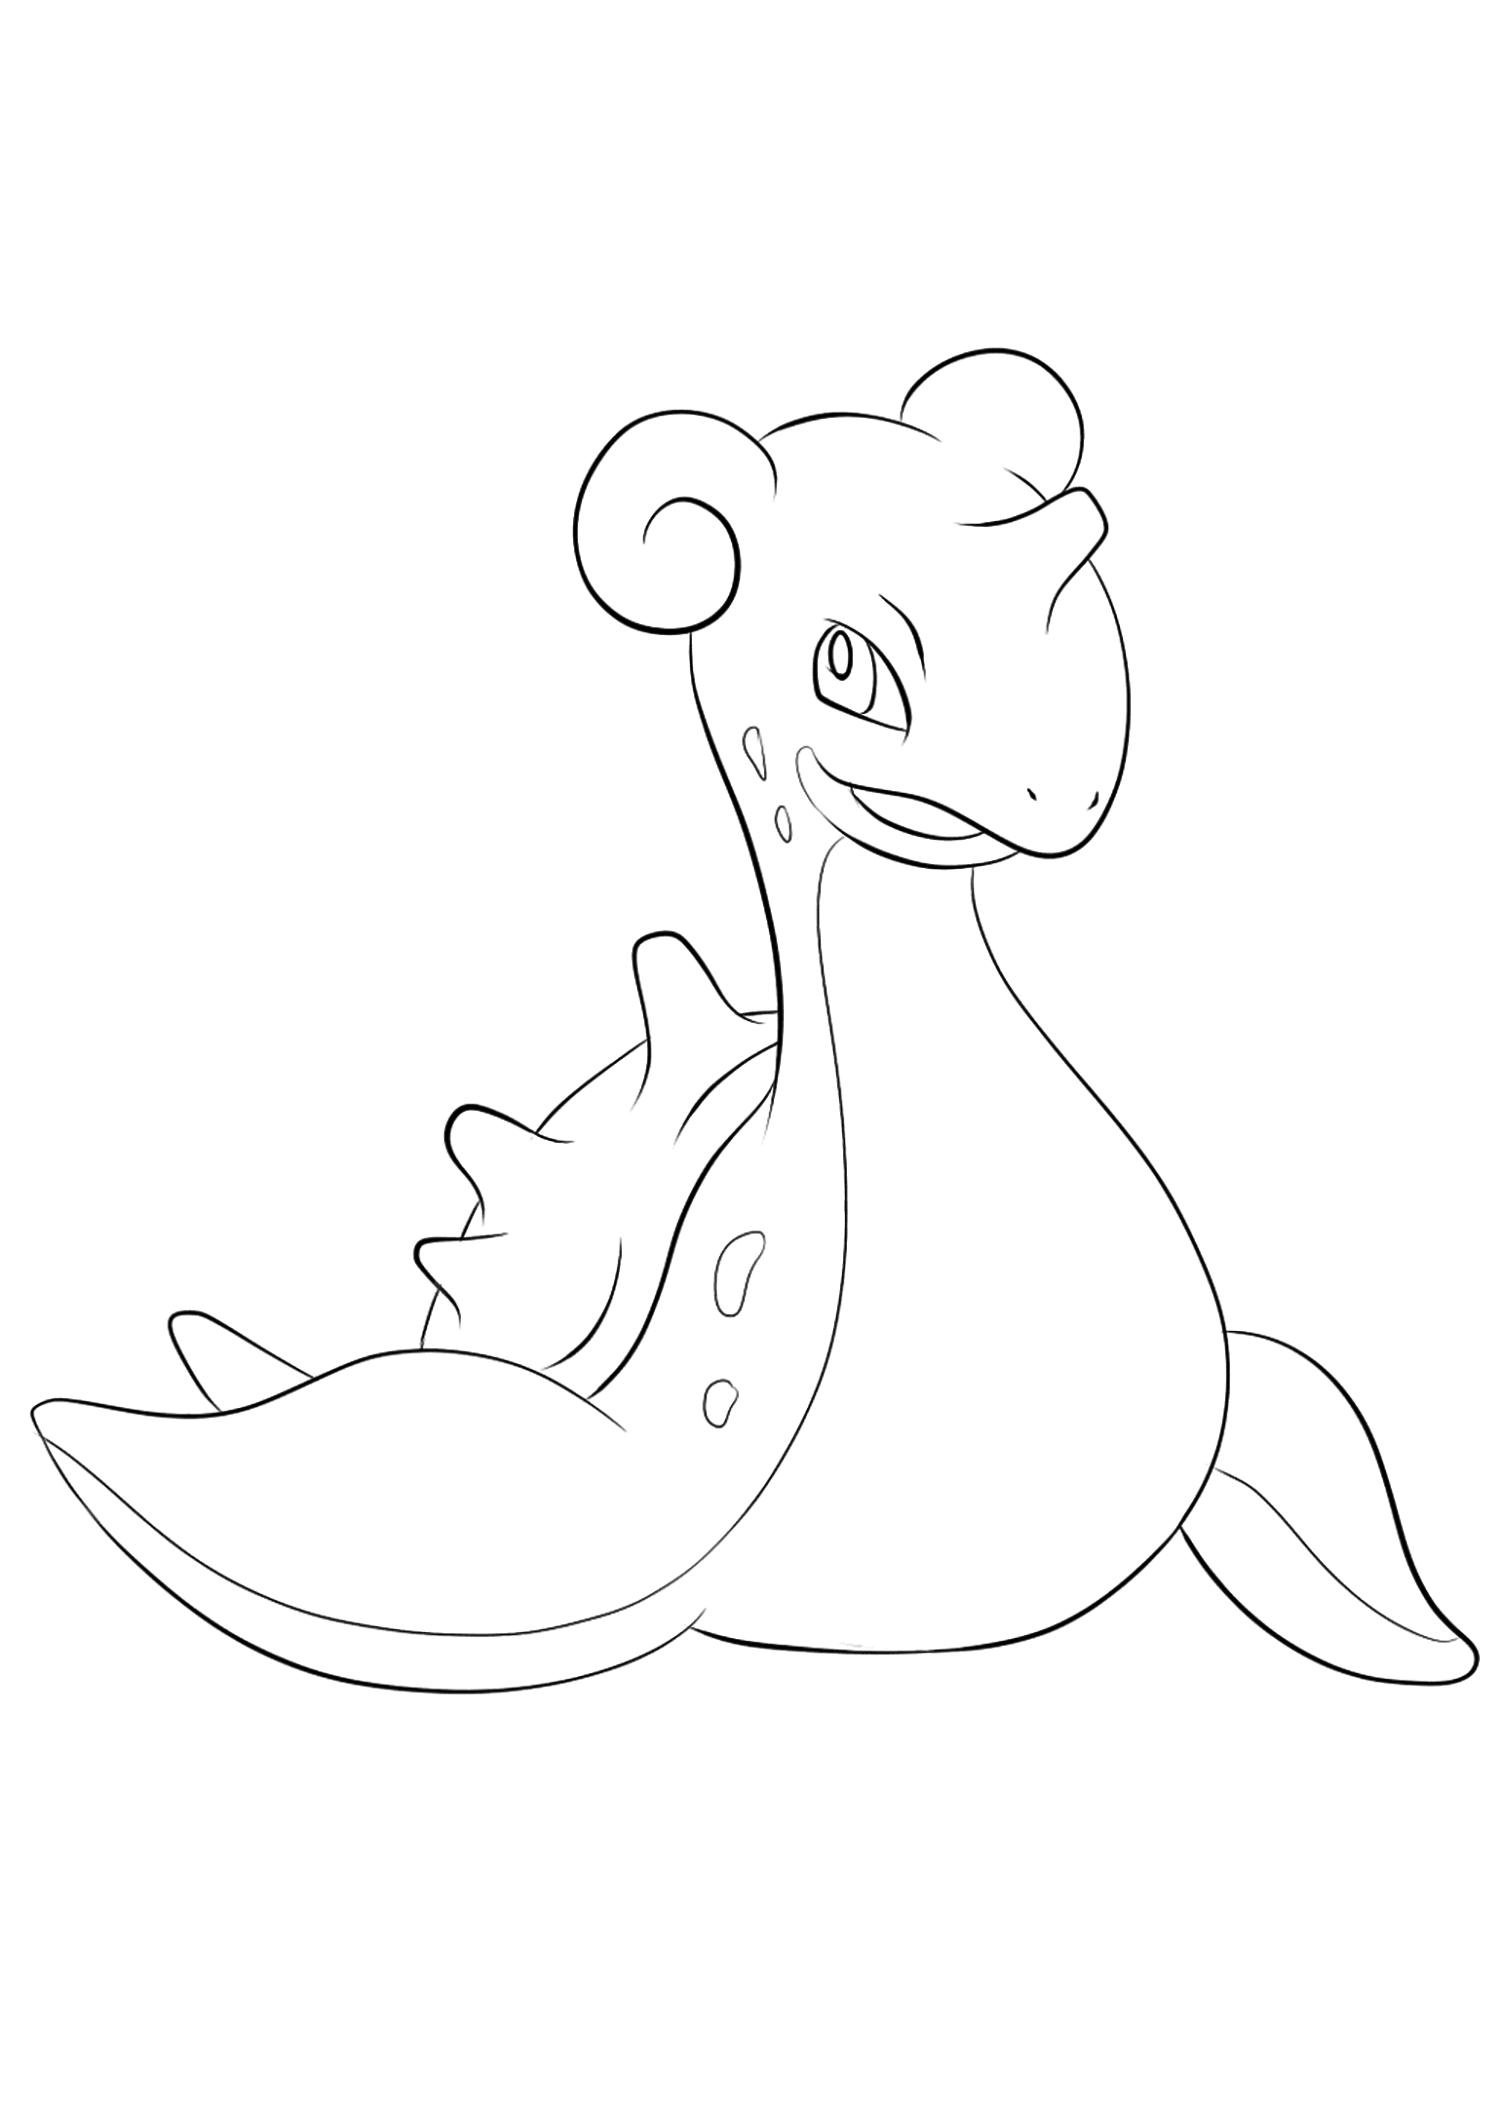 Lapras (No.131). Lapras Coloring page, Generation I Pokemon of type Water and IceOriginal image credit: Pokemon linearts by Lilly Gerbil on Deviantart.Permission:  All rights reserved © Pokemon company and Ken Sugimori.